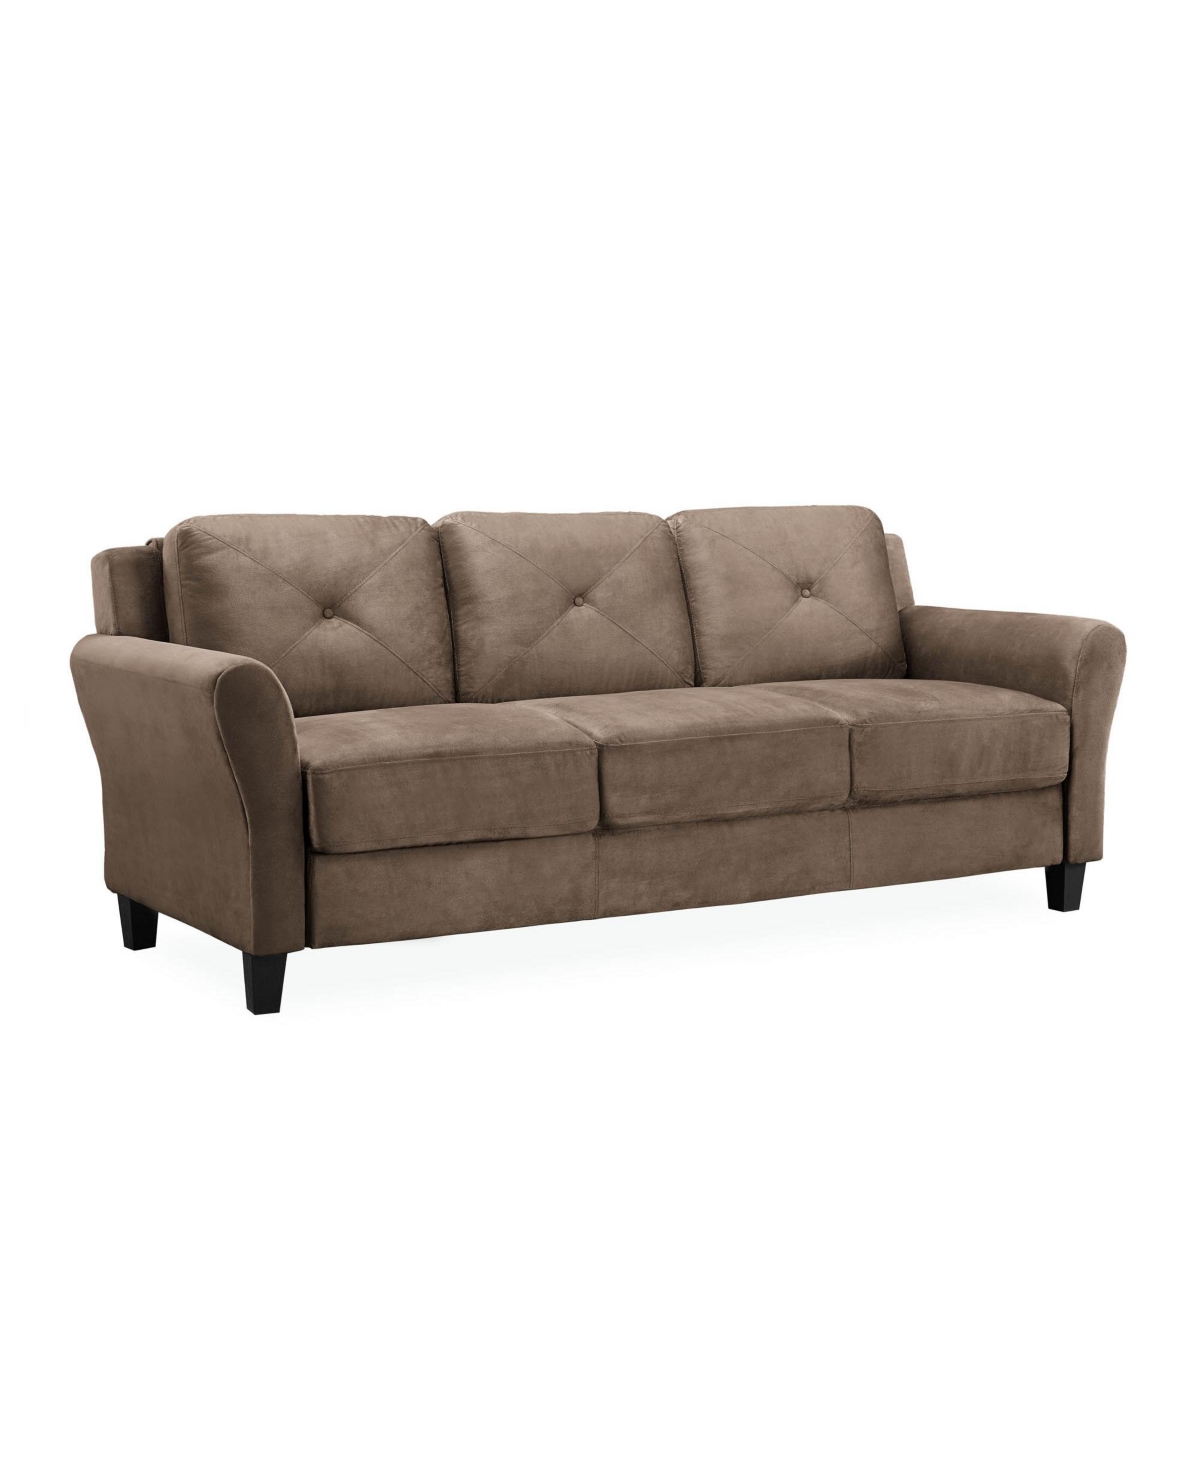 Lifestyle Solutions Harvard Sofa With Rolled Arms In Brown